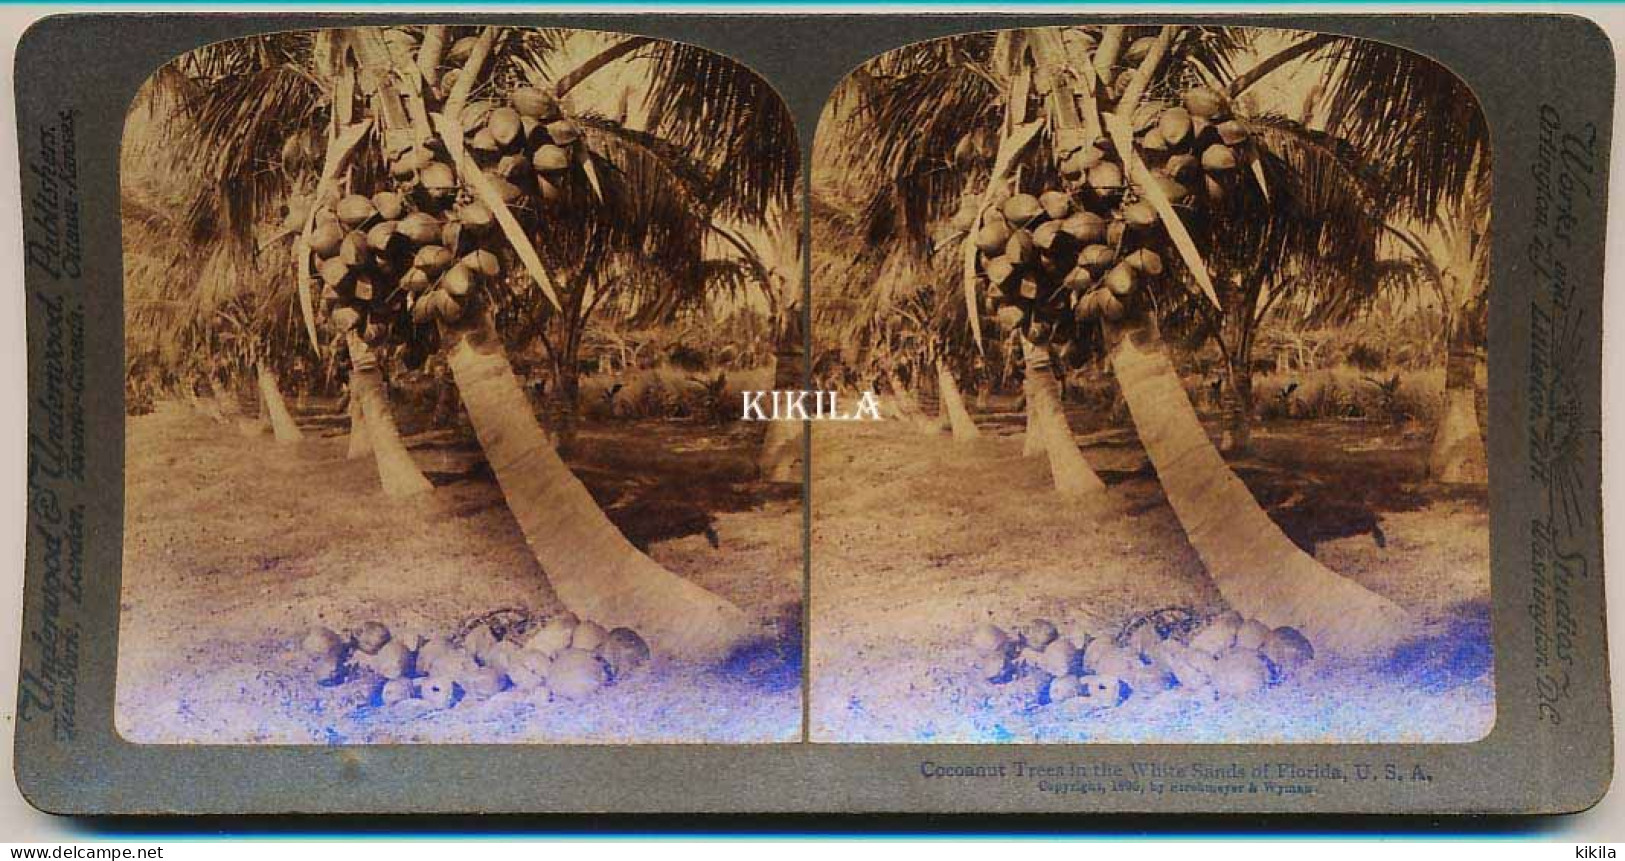 Photo Stéréoscopique (9) 7,7 X 8 Cm Carton Fort 17,7 X 8,8 Cm (99) Cocoanut Trees In The White Sands Of Florida, U.S.A.* - Stereo-Photographie